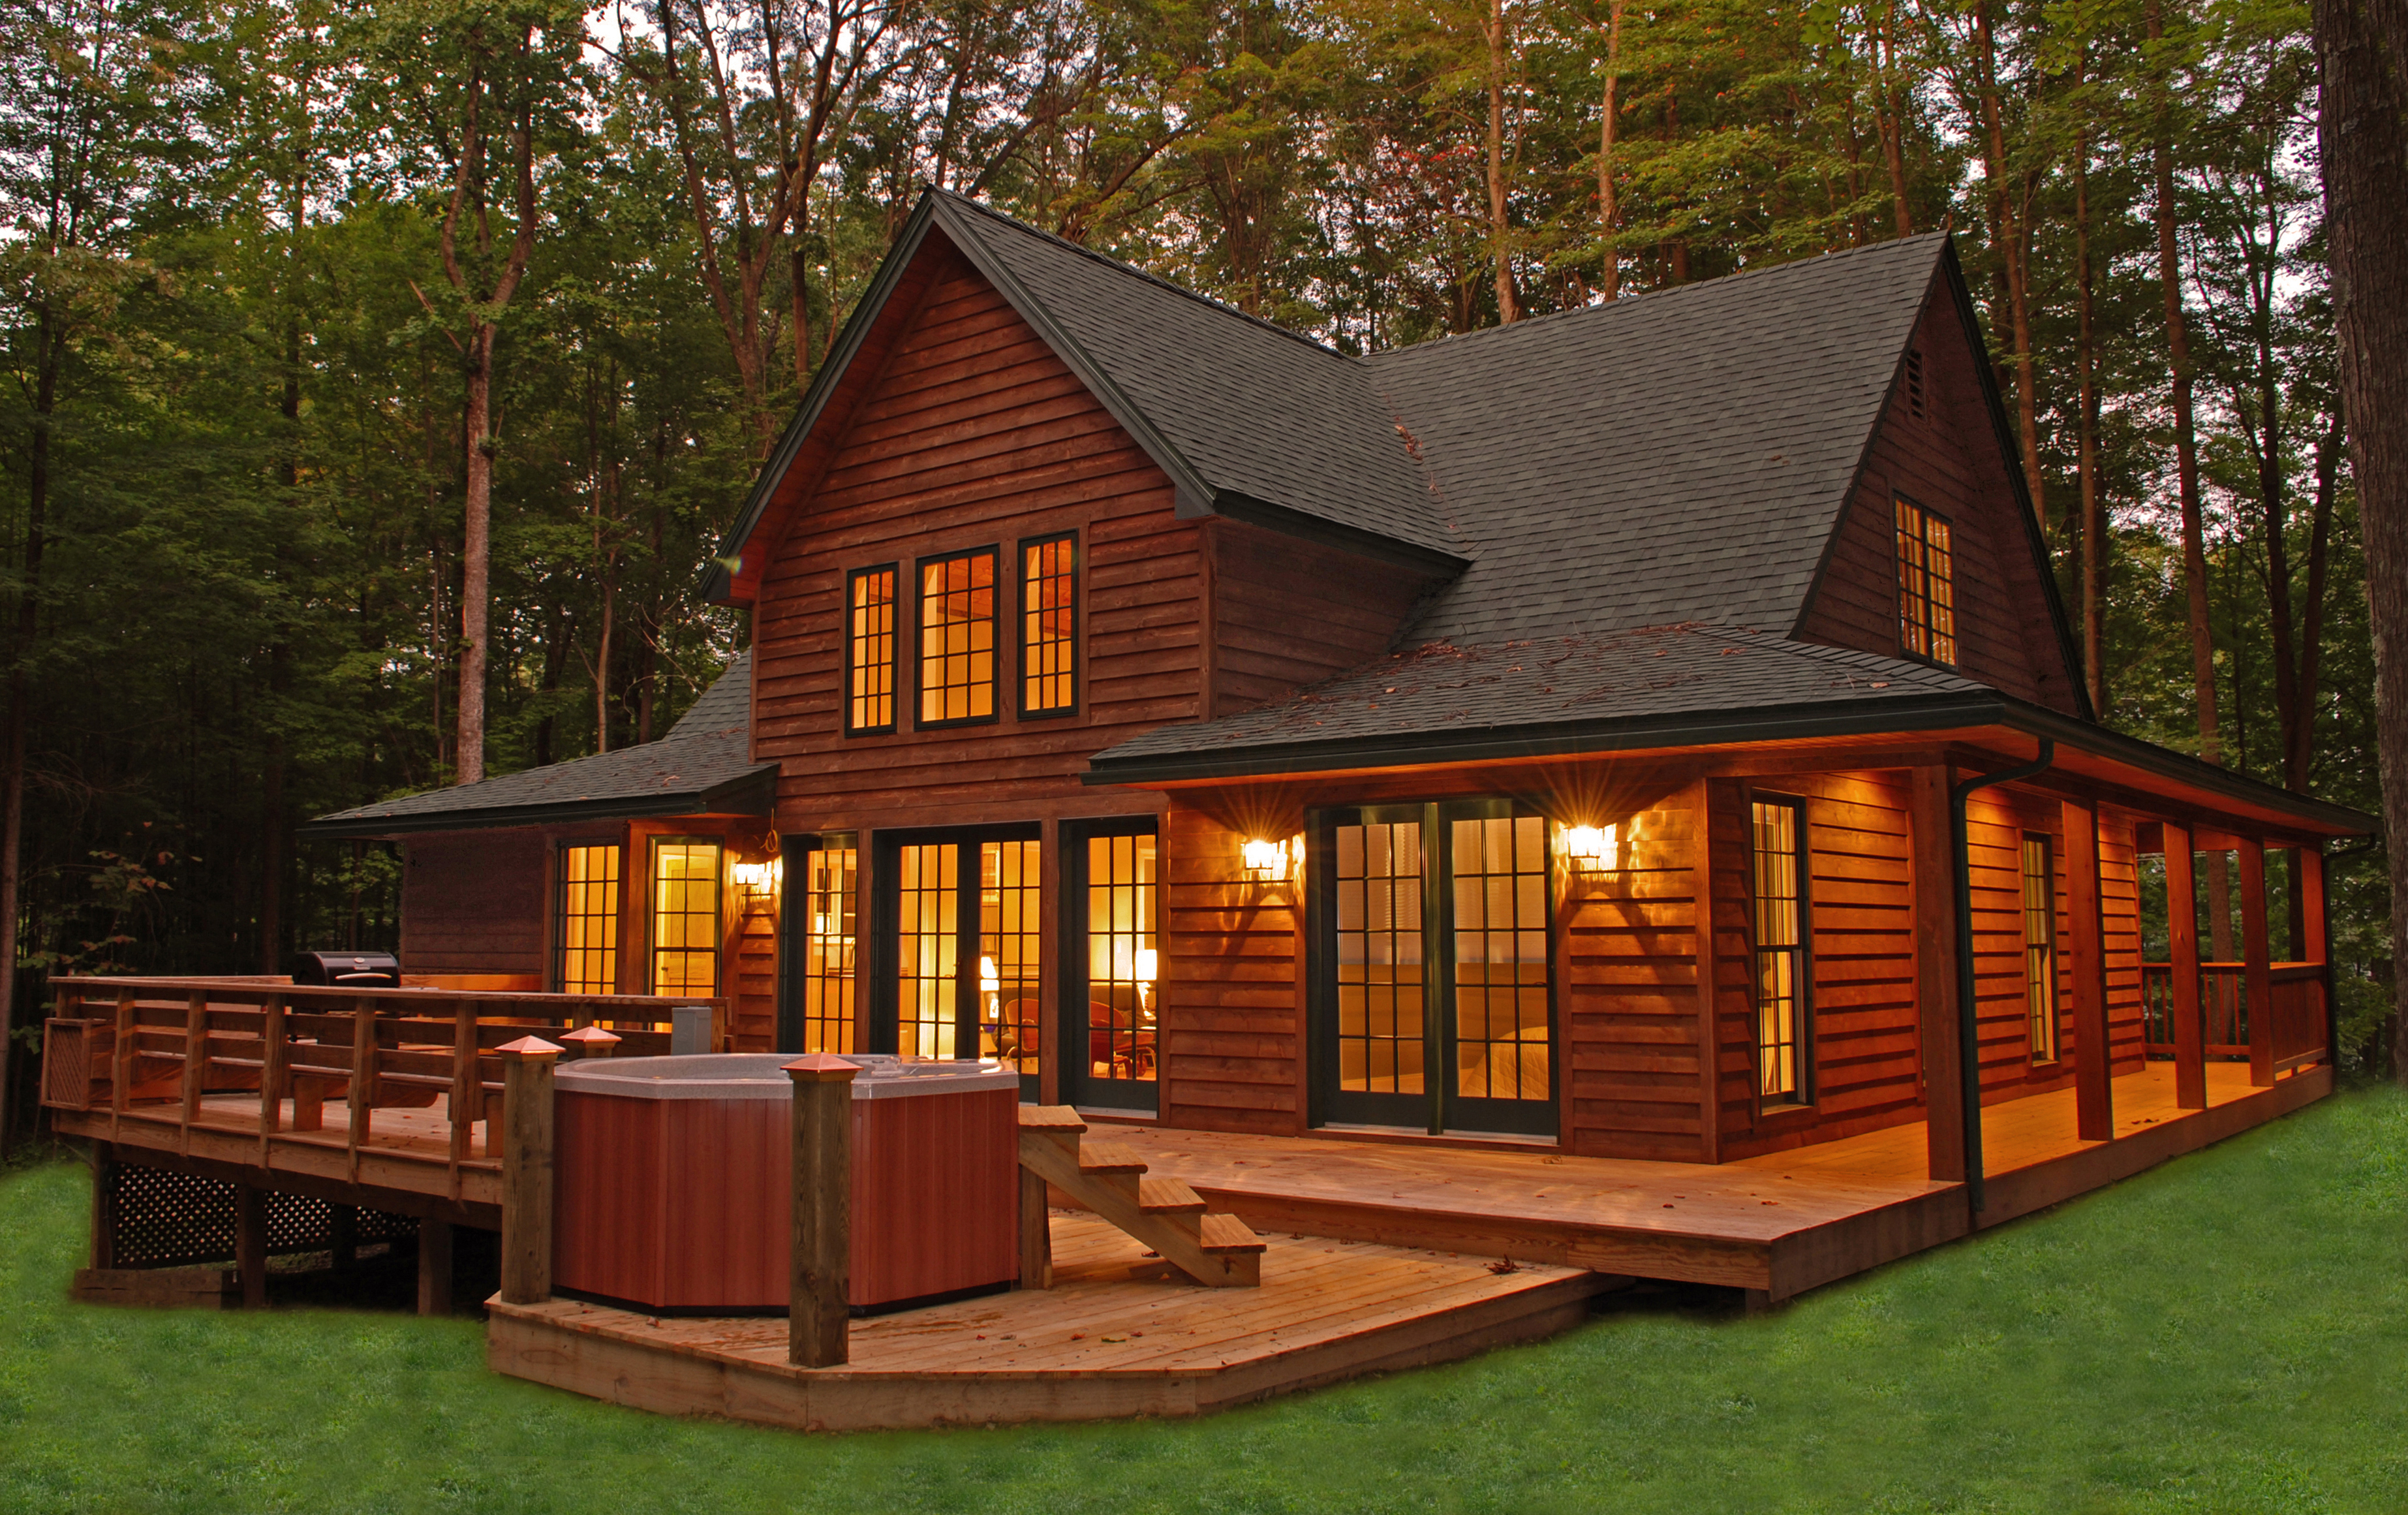 New River Gorge Vacation Rentals and Cabins - New River Gorge CVB : New